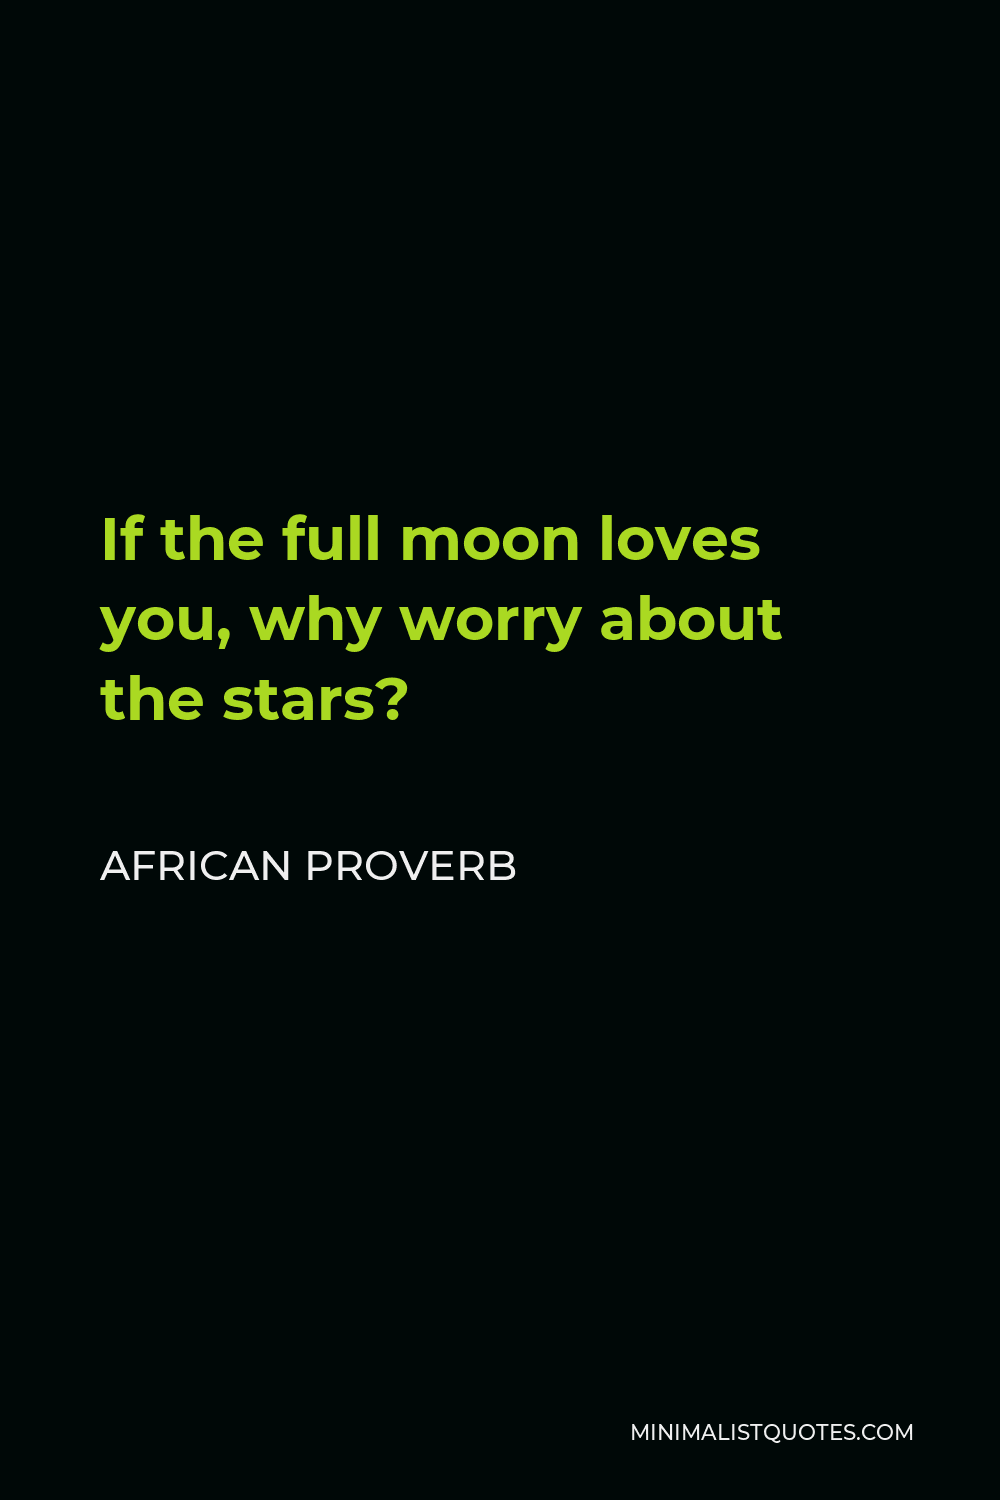 African Proverb Quote - If the full moon loves you, why worry about the stars?